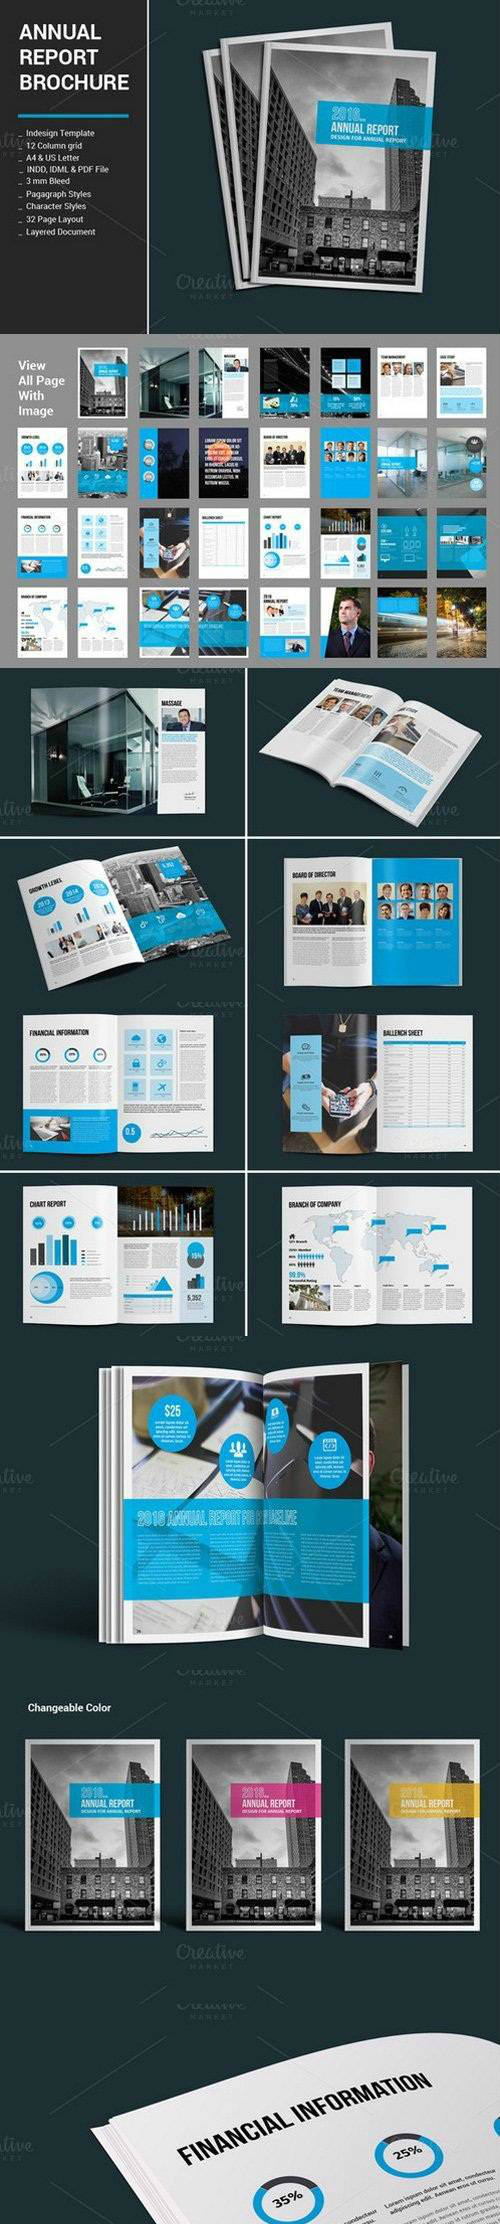 Indesign Annual Report Brochure 471423